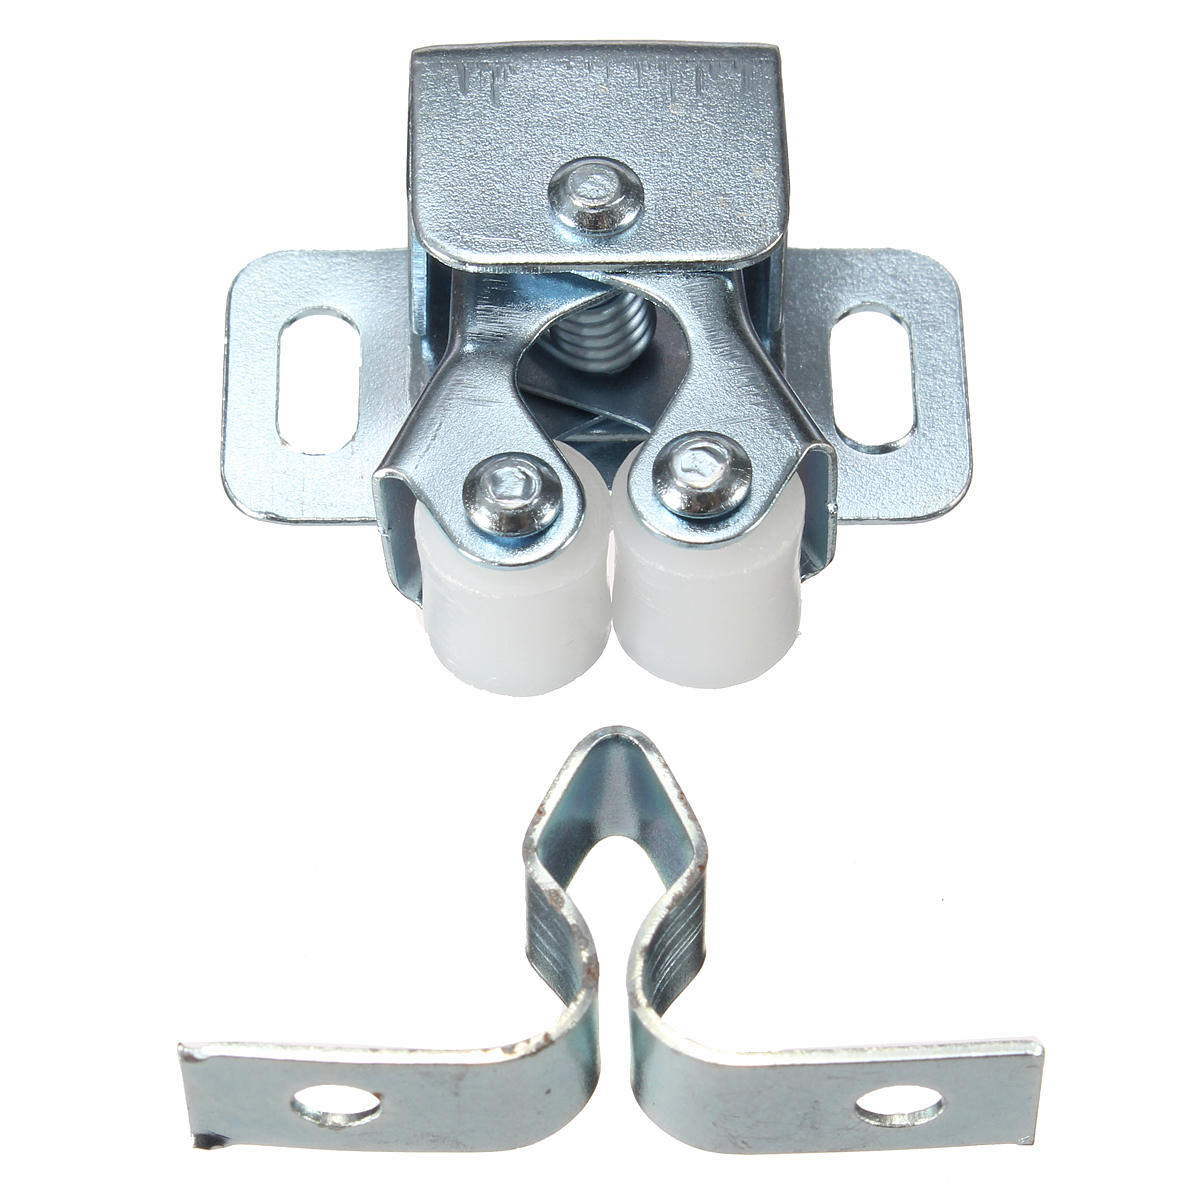 Double-Roller-Catch-Cupboard-Cabinet-Door-Furniture-Latch-Hardware-with-Spear-Strikes-1198119-10